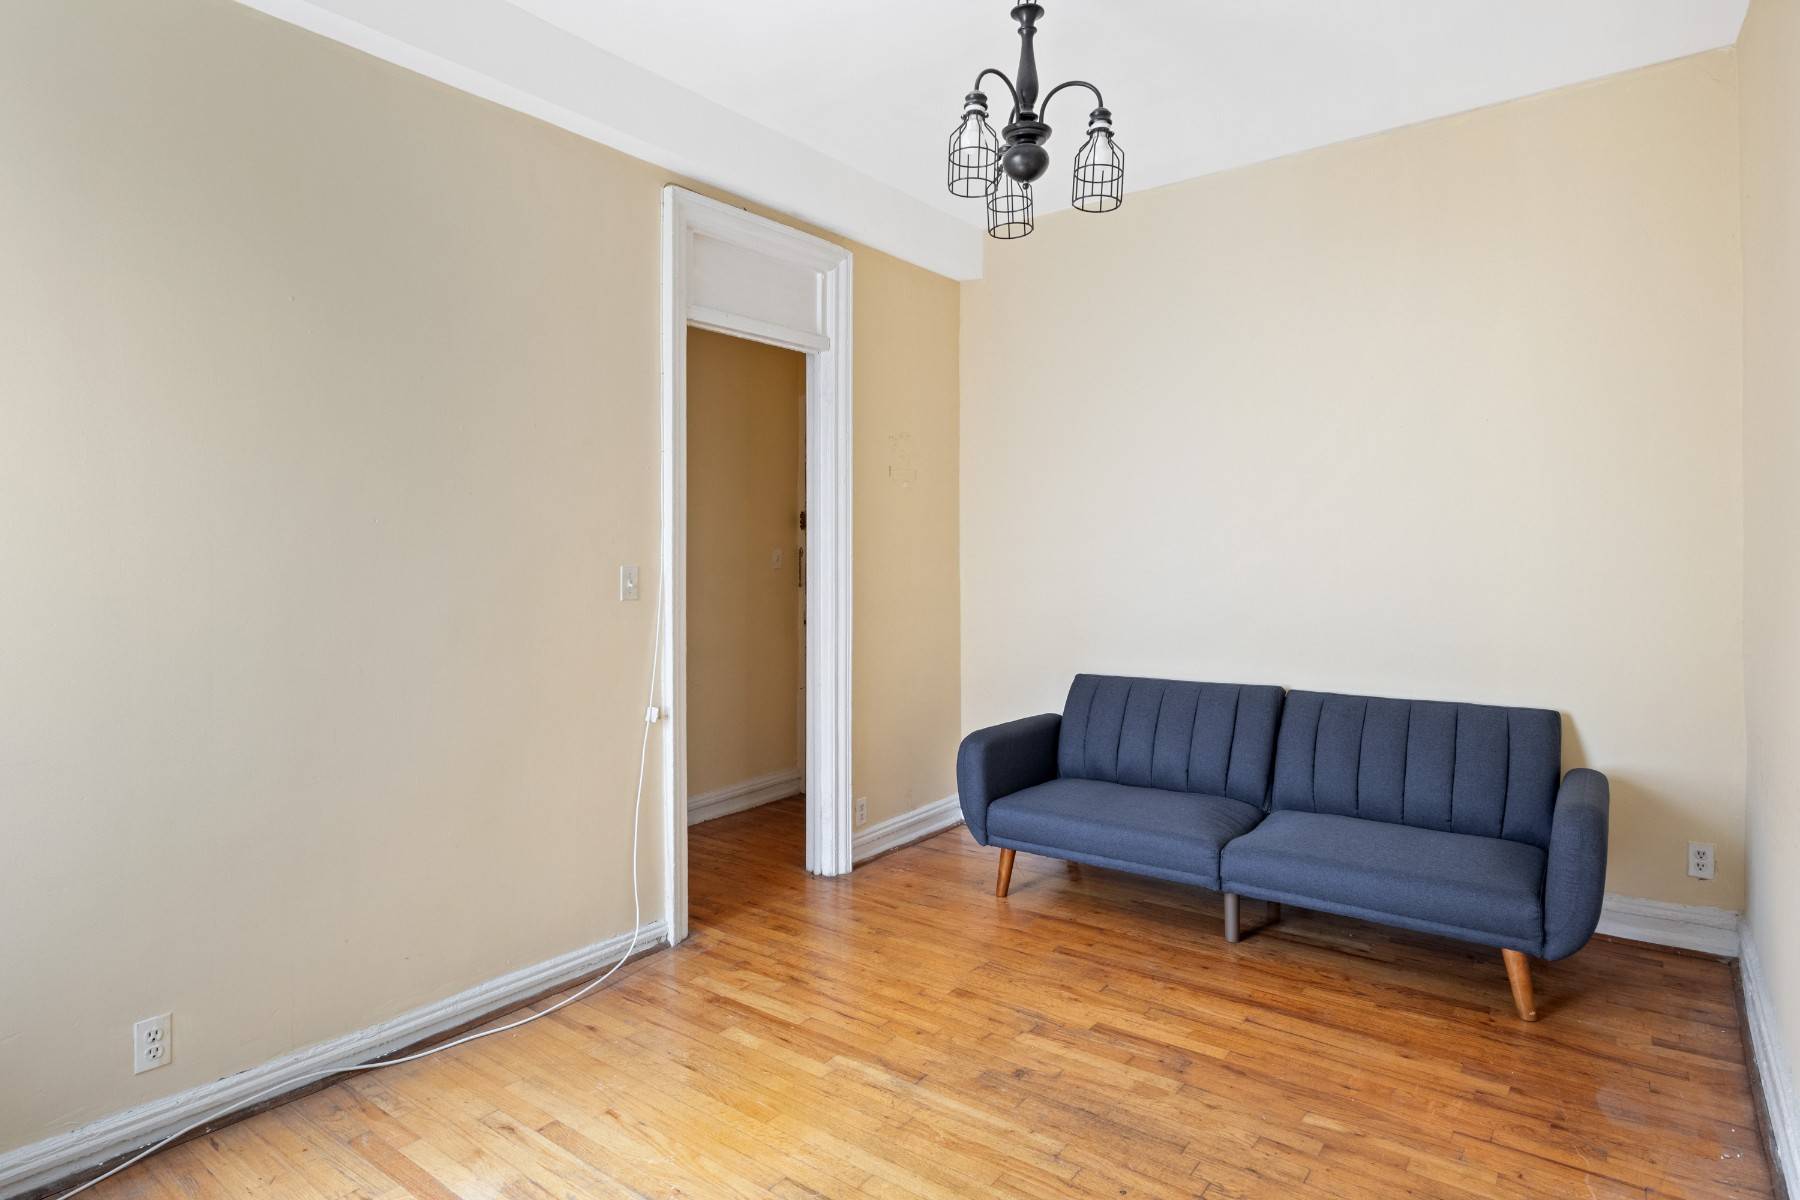 Discover this large 1 bedroom, 1 bathroom co op apartment in the upper west side near Columbia University in Morningside Heights.